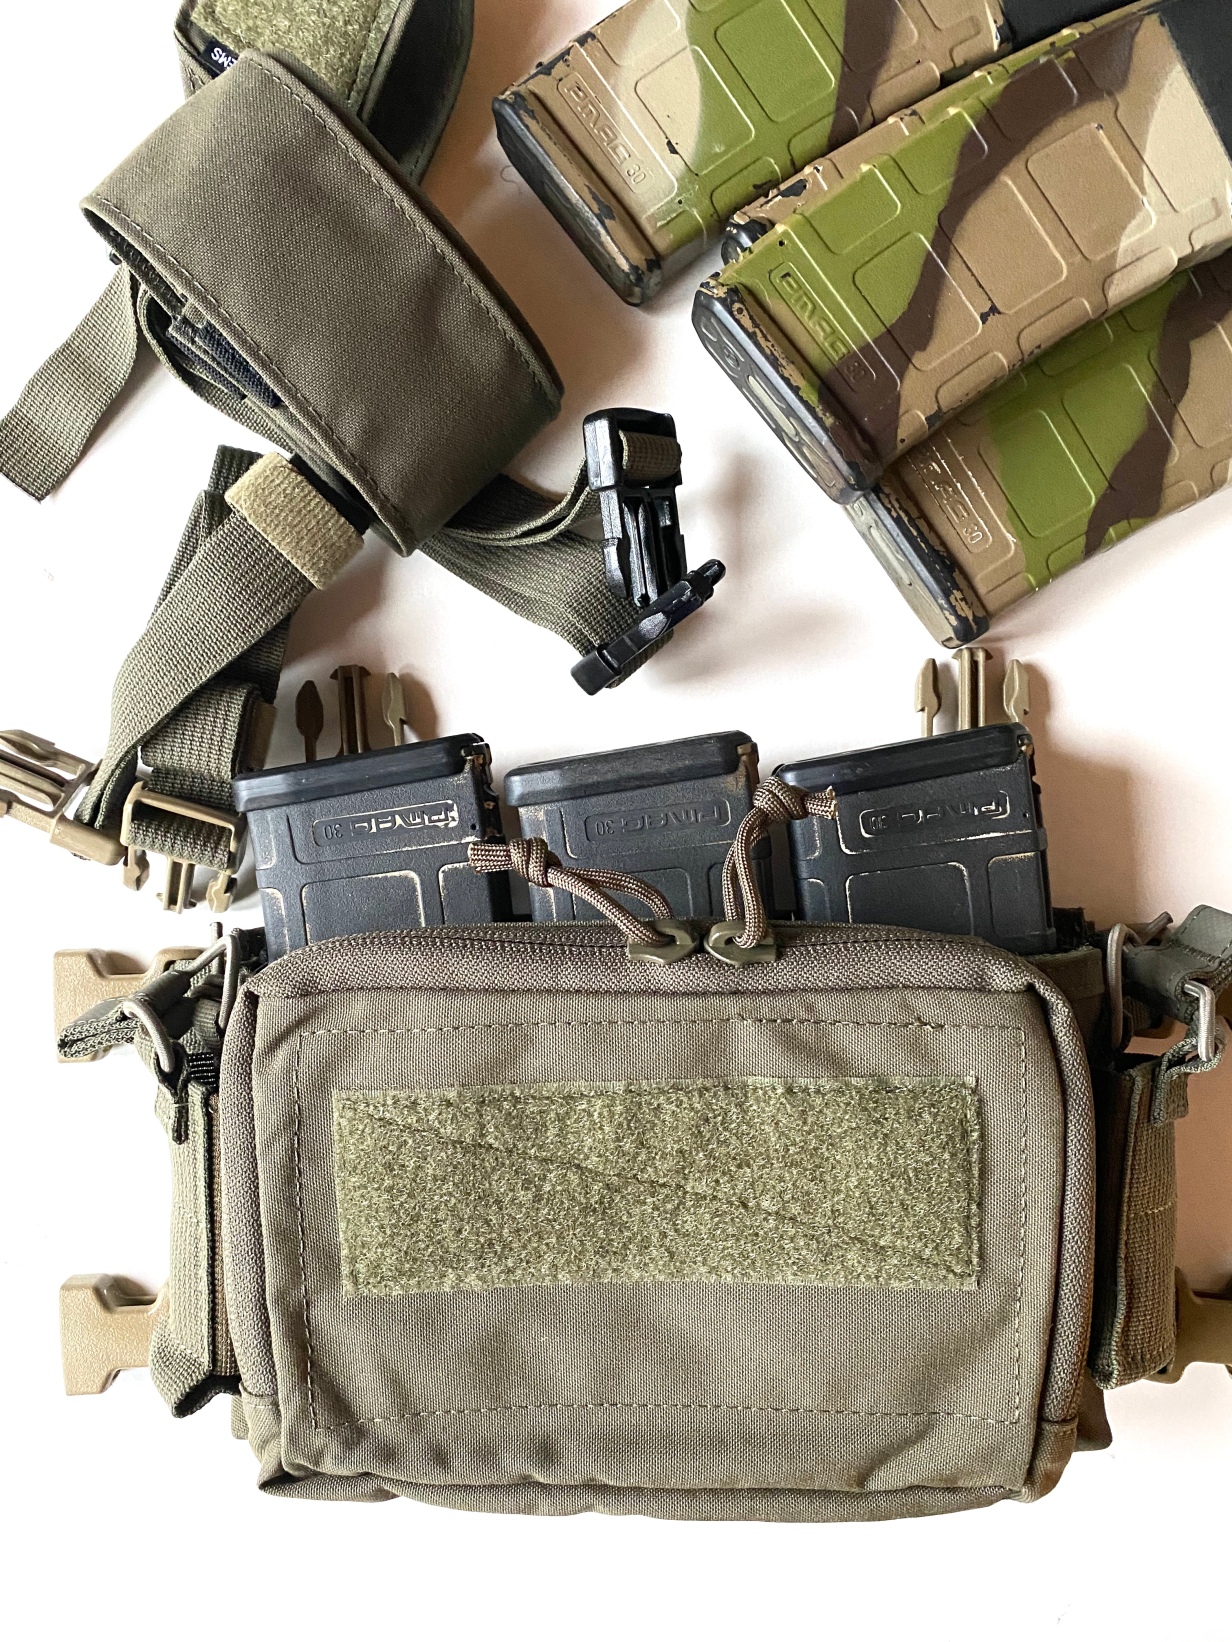 REVIEW: Haley Strategic D3CRM Micro Adaptive Chest Rig – Updated Version